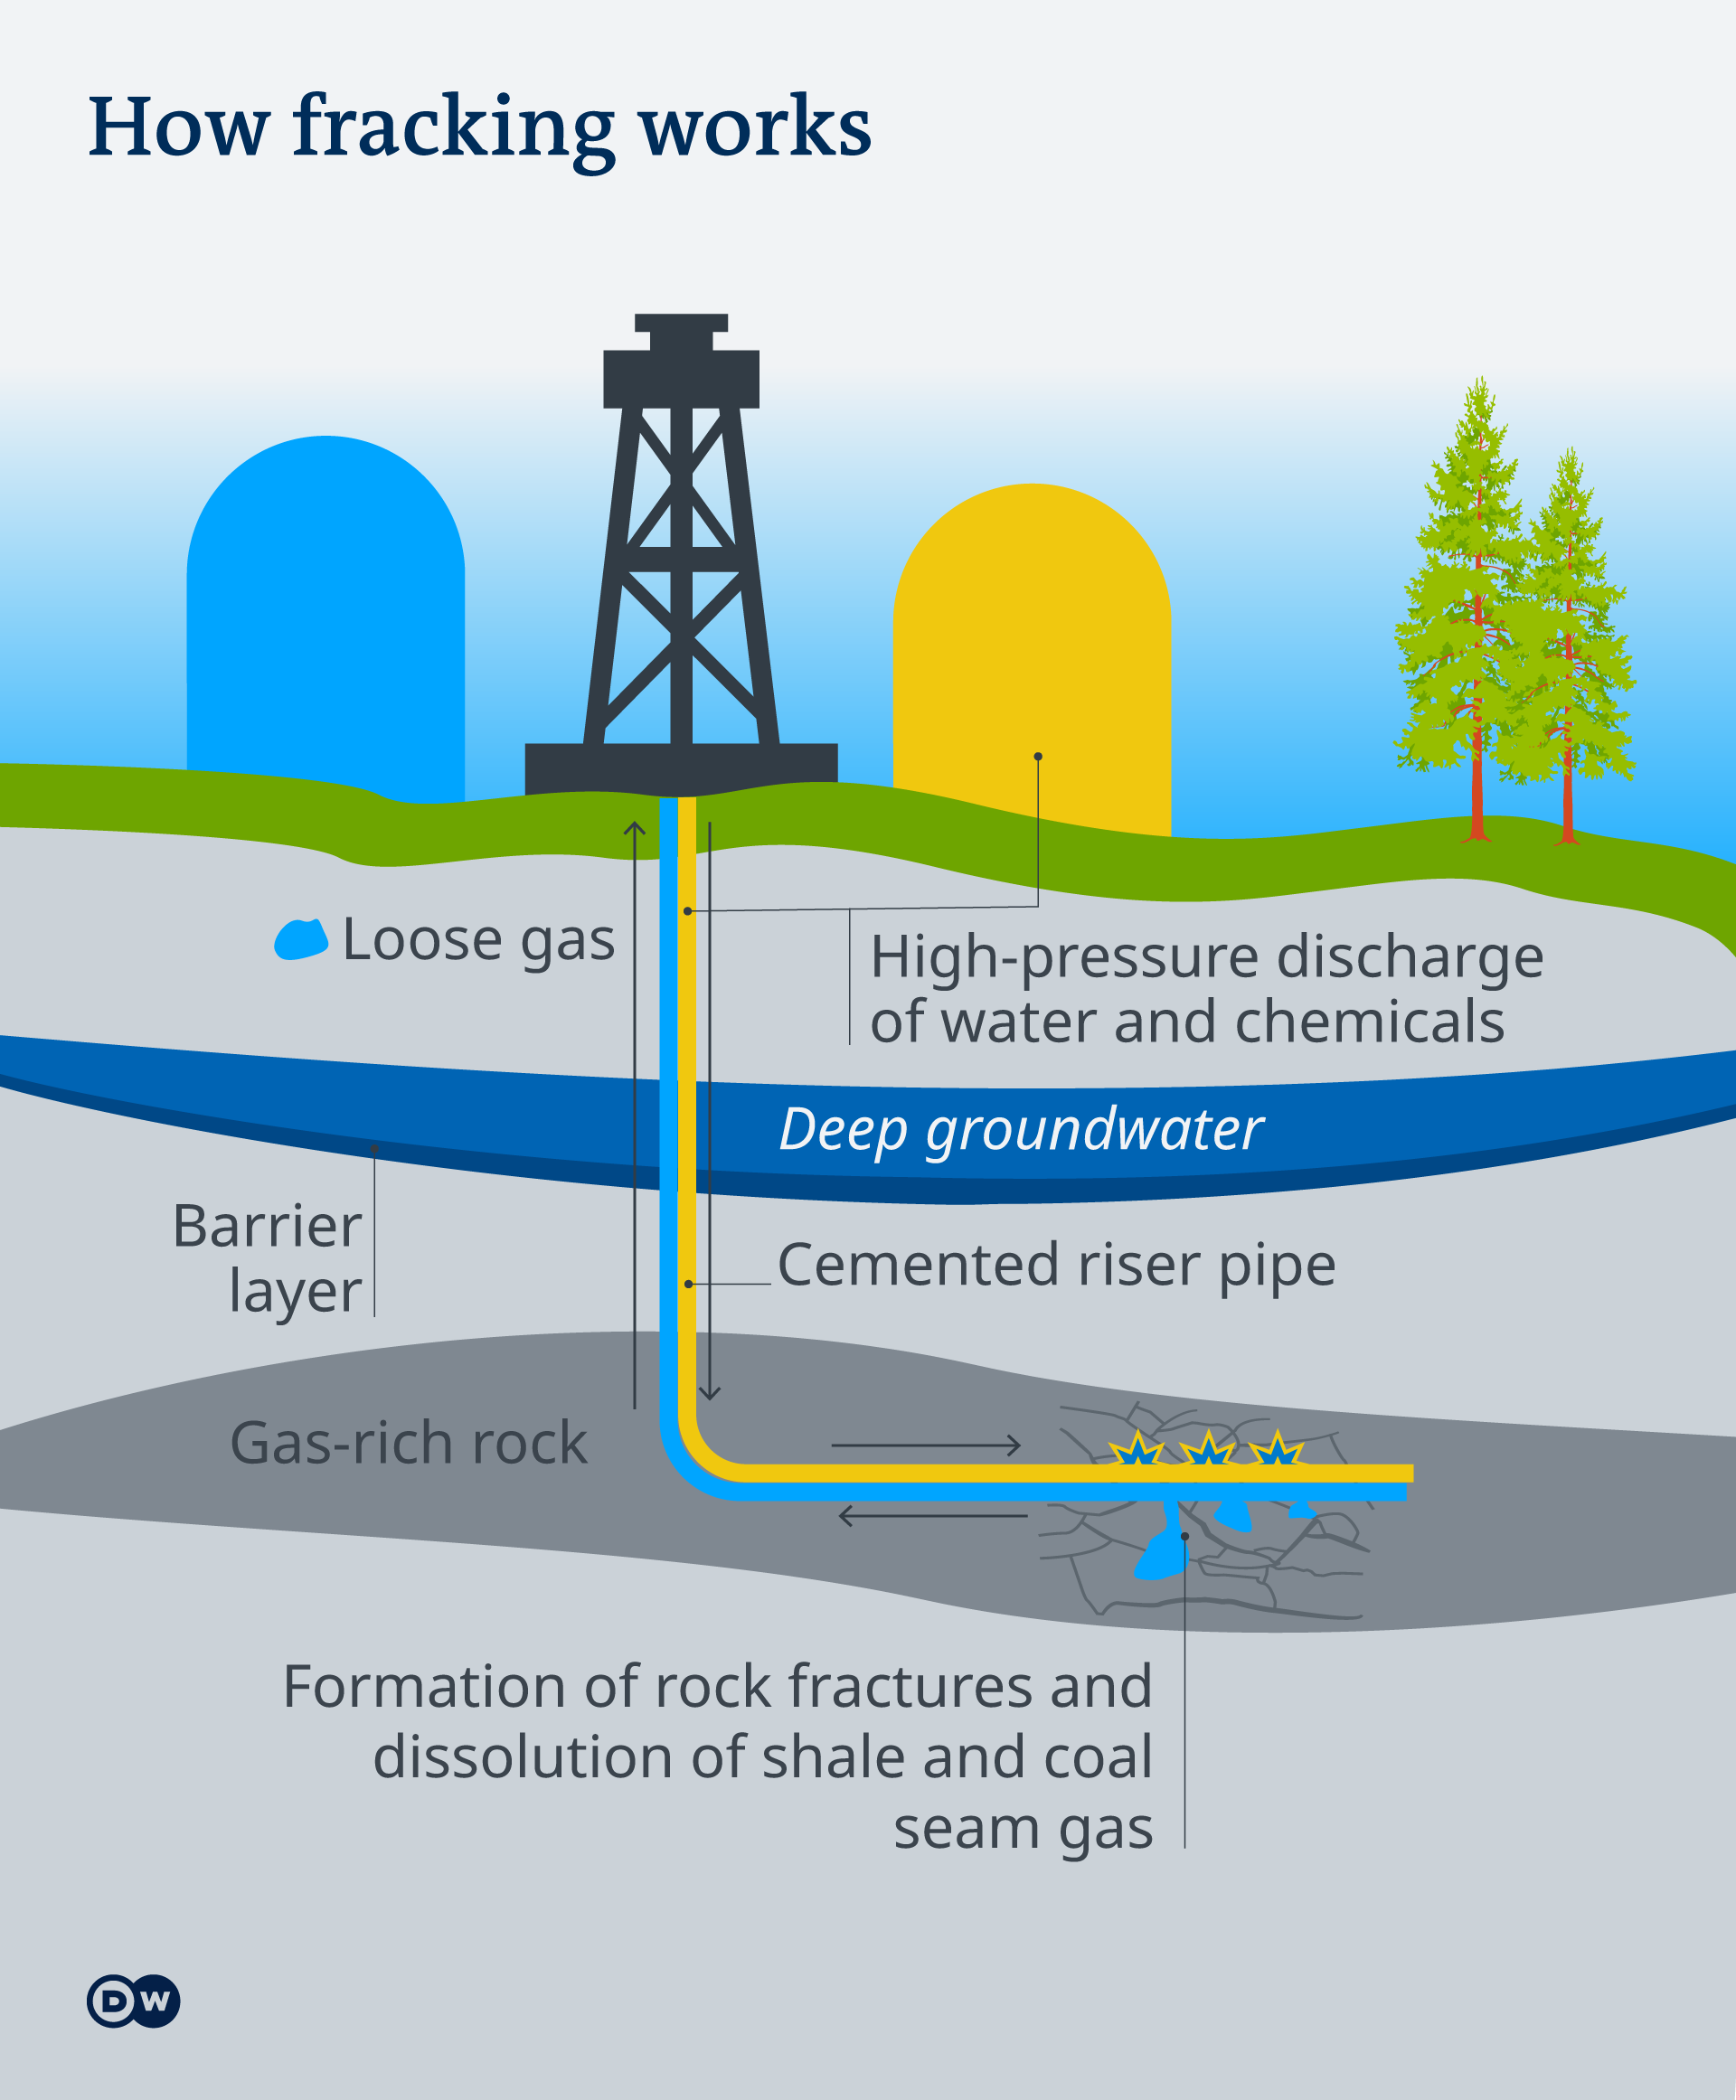 Graphic shows the fracking process from loose gas to discharge of water and chemicals